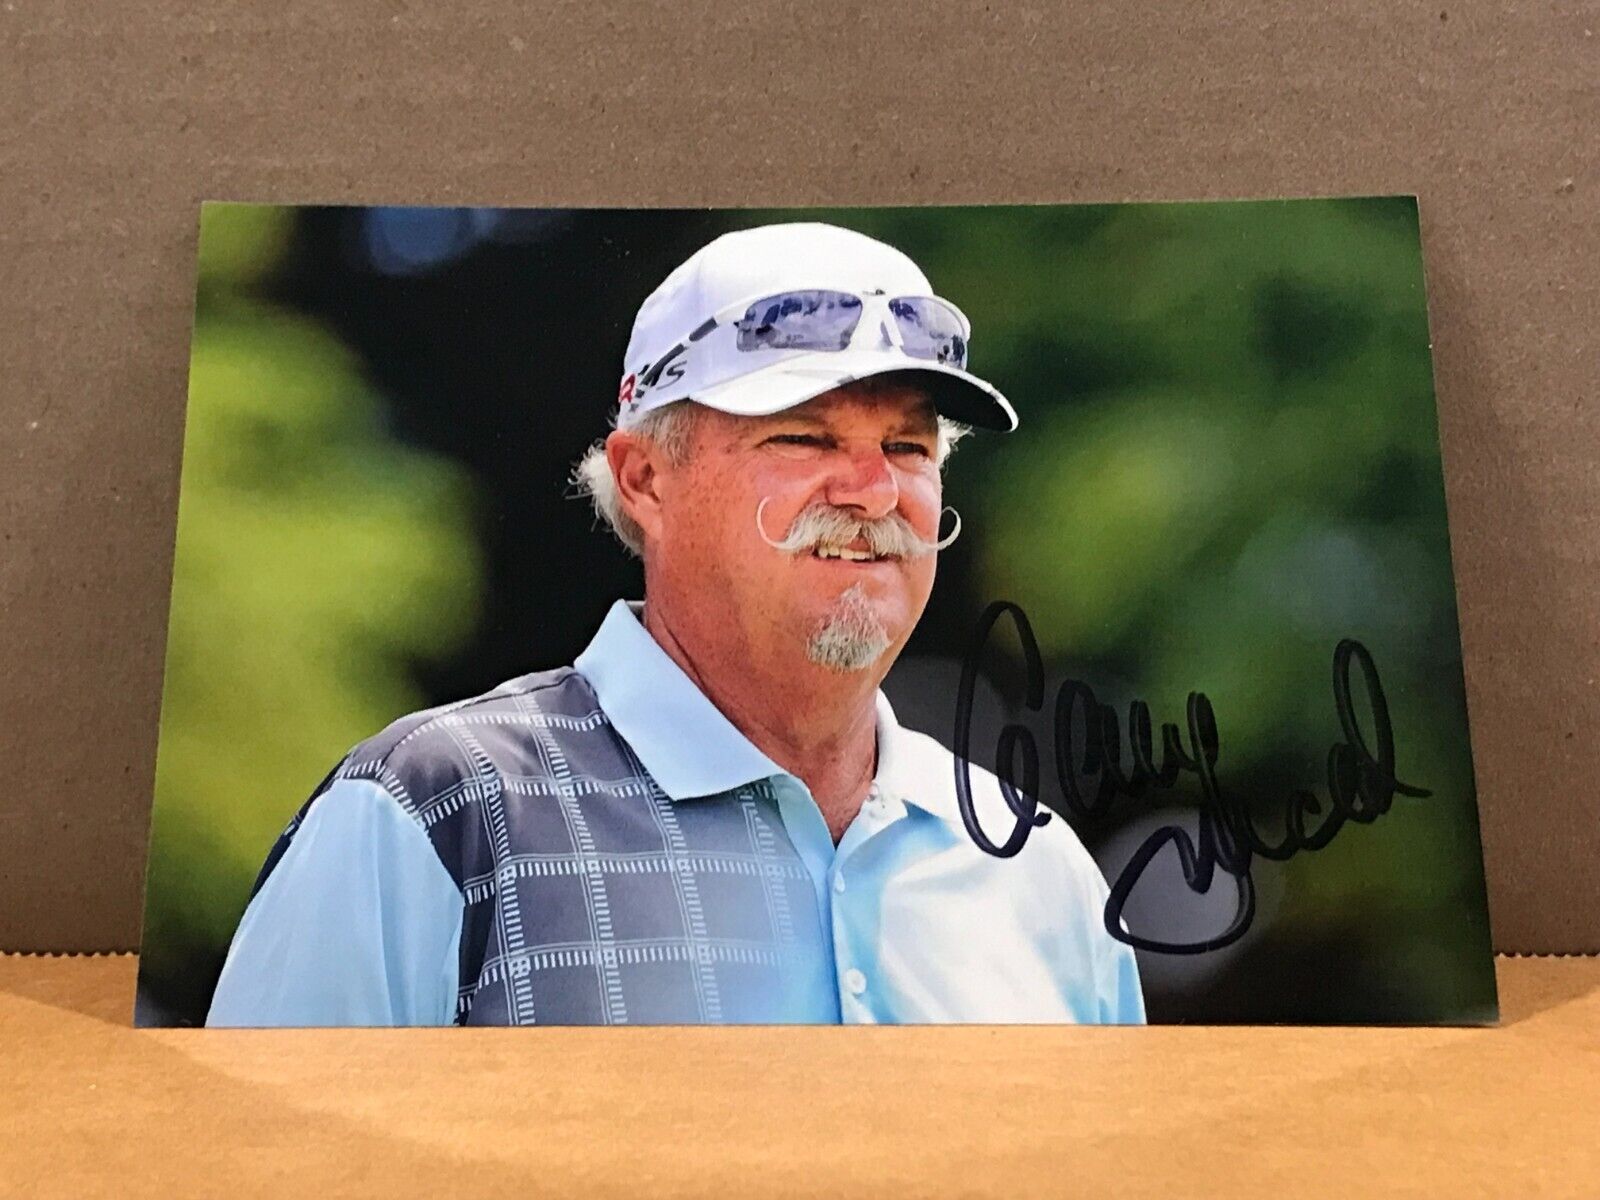 Gary Mccord Authentic Hand Signed Autograph 4x6 Photo - Golf Announcer Pga